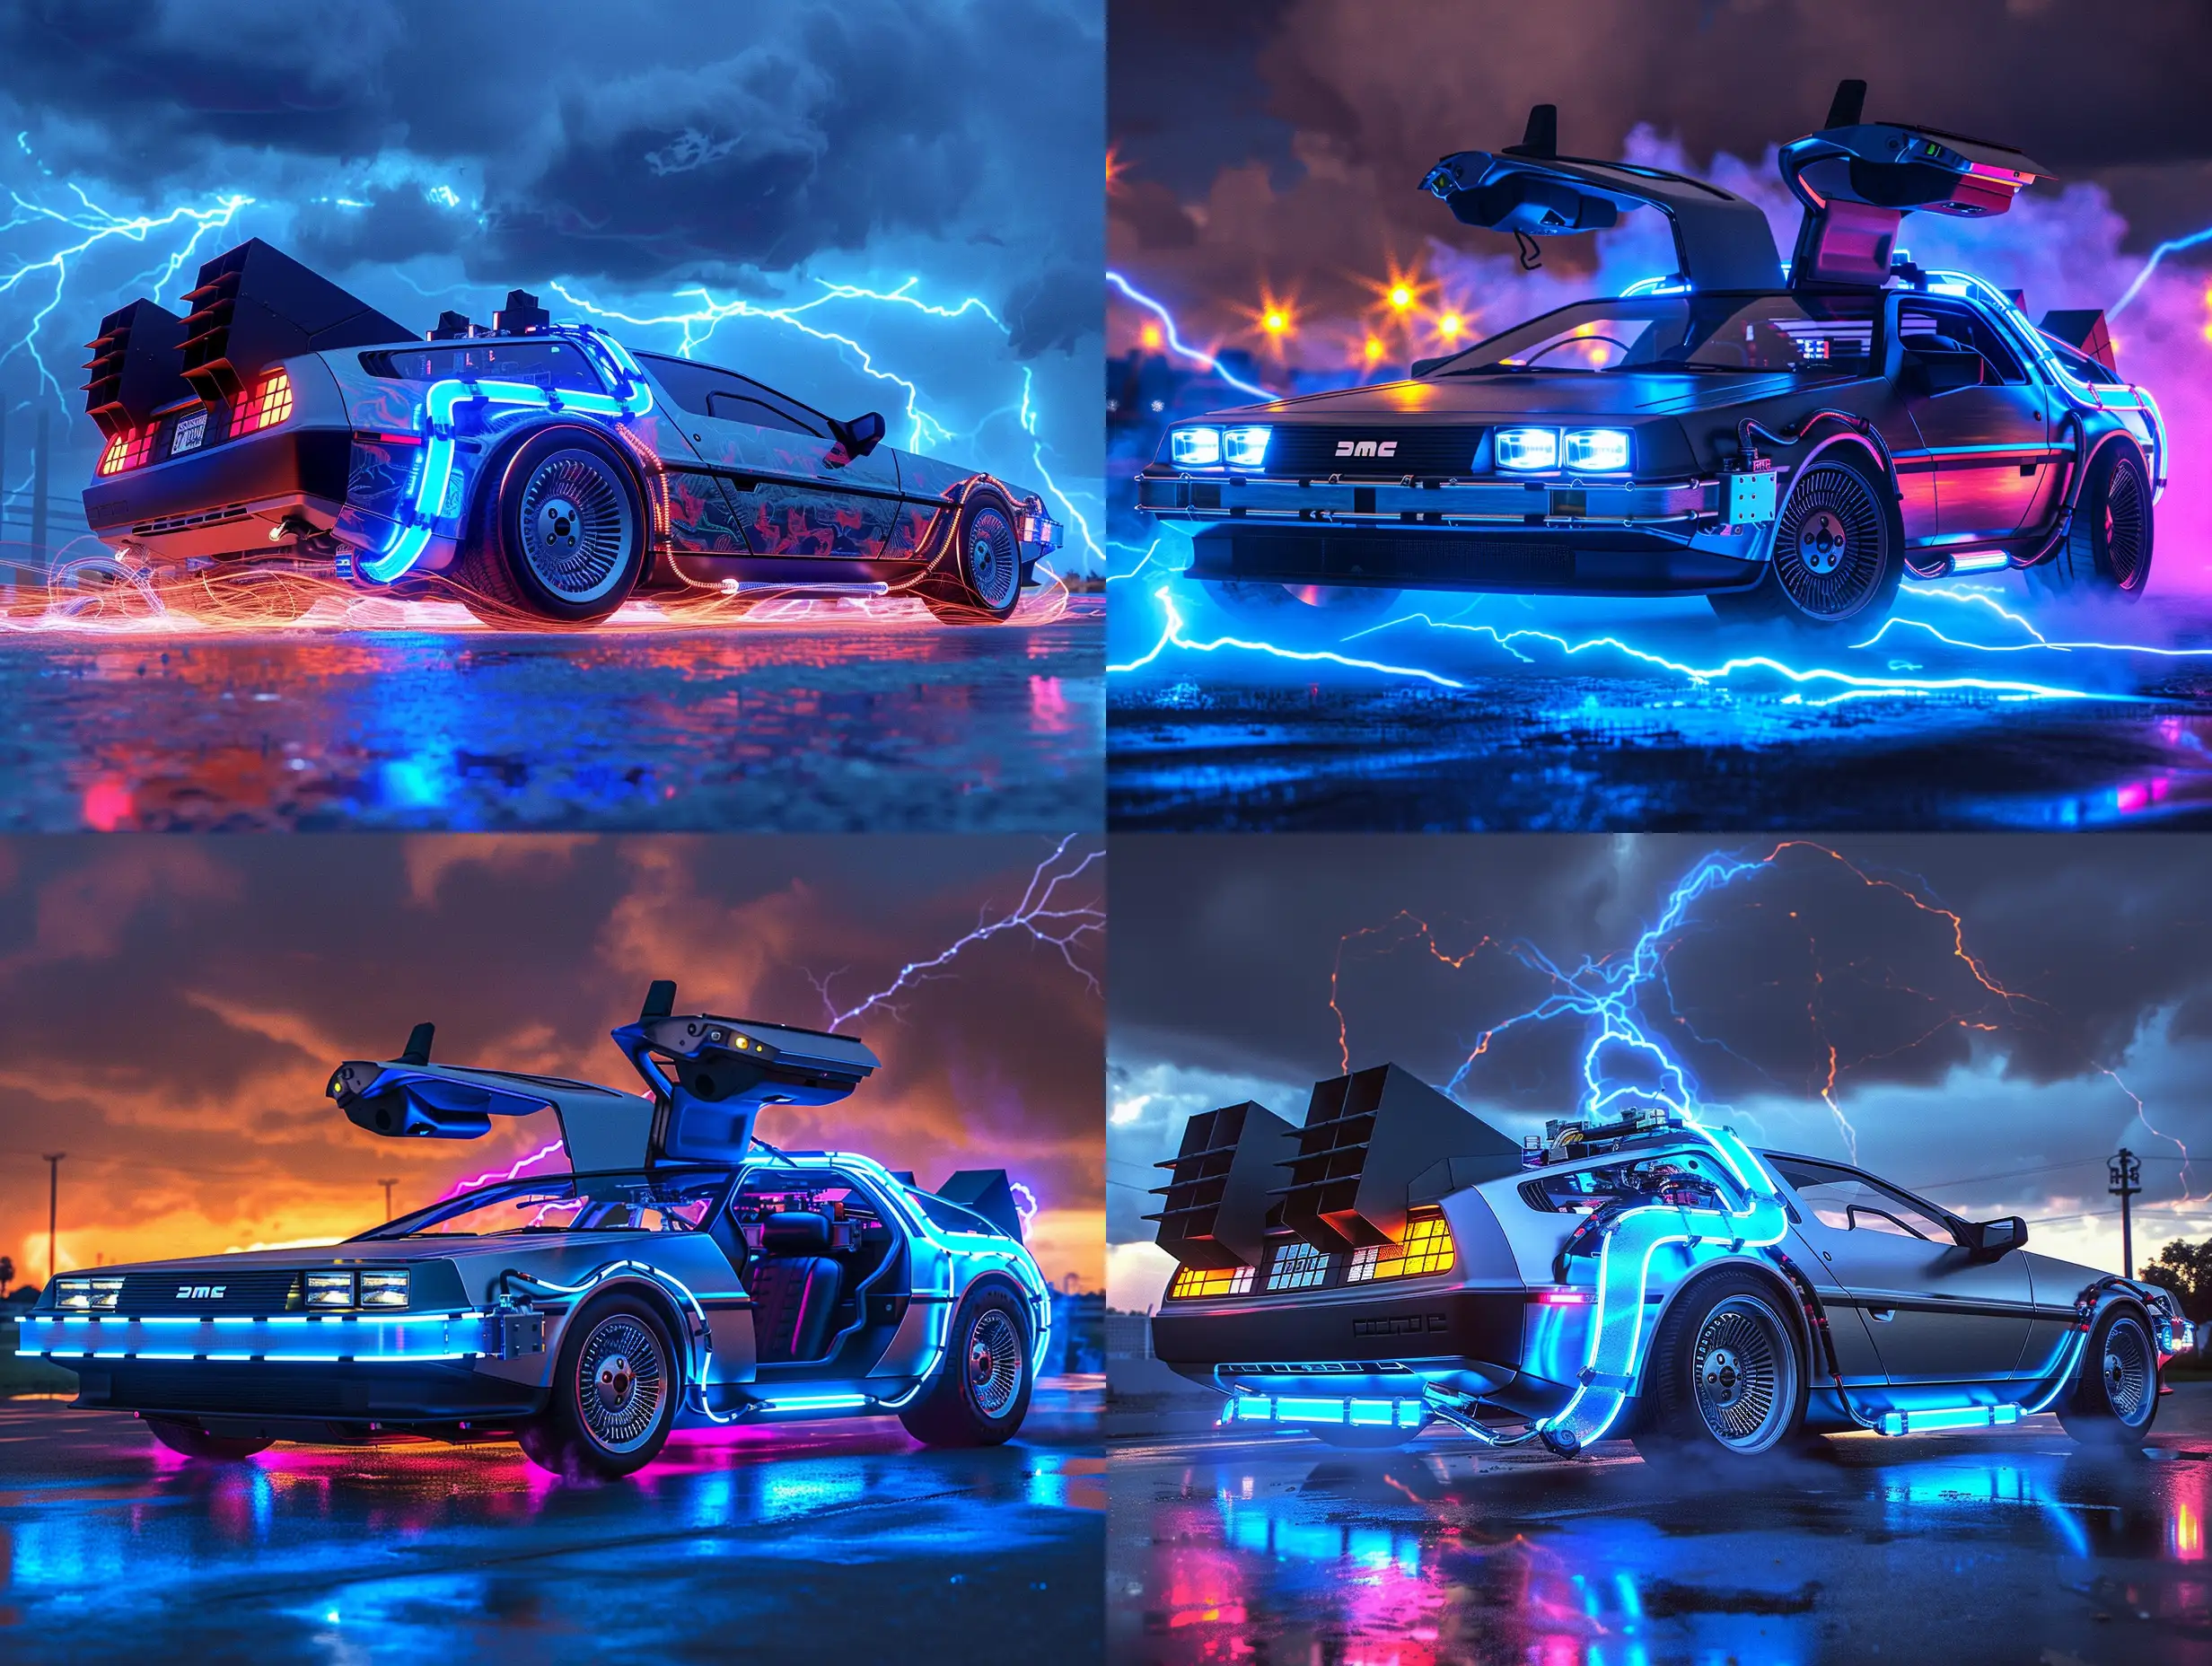 Vivid-SciFi-Art-Back-to-the-Future-Delorean-with-Blue-Lightning-and-Fire-Trails